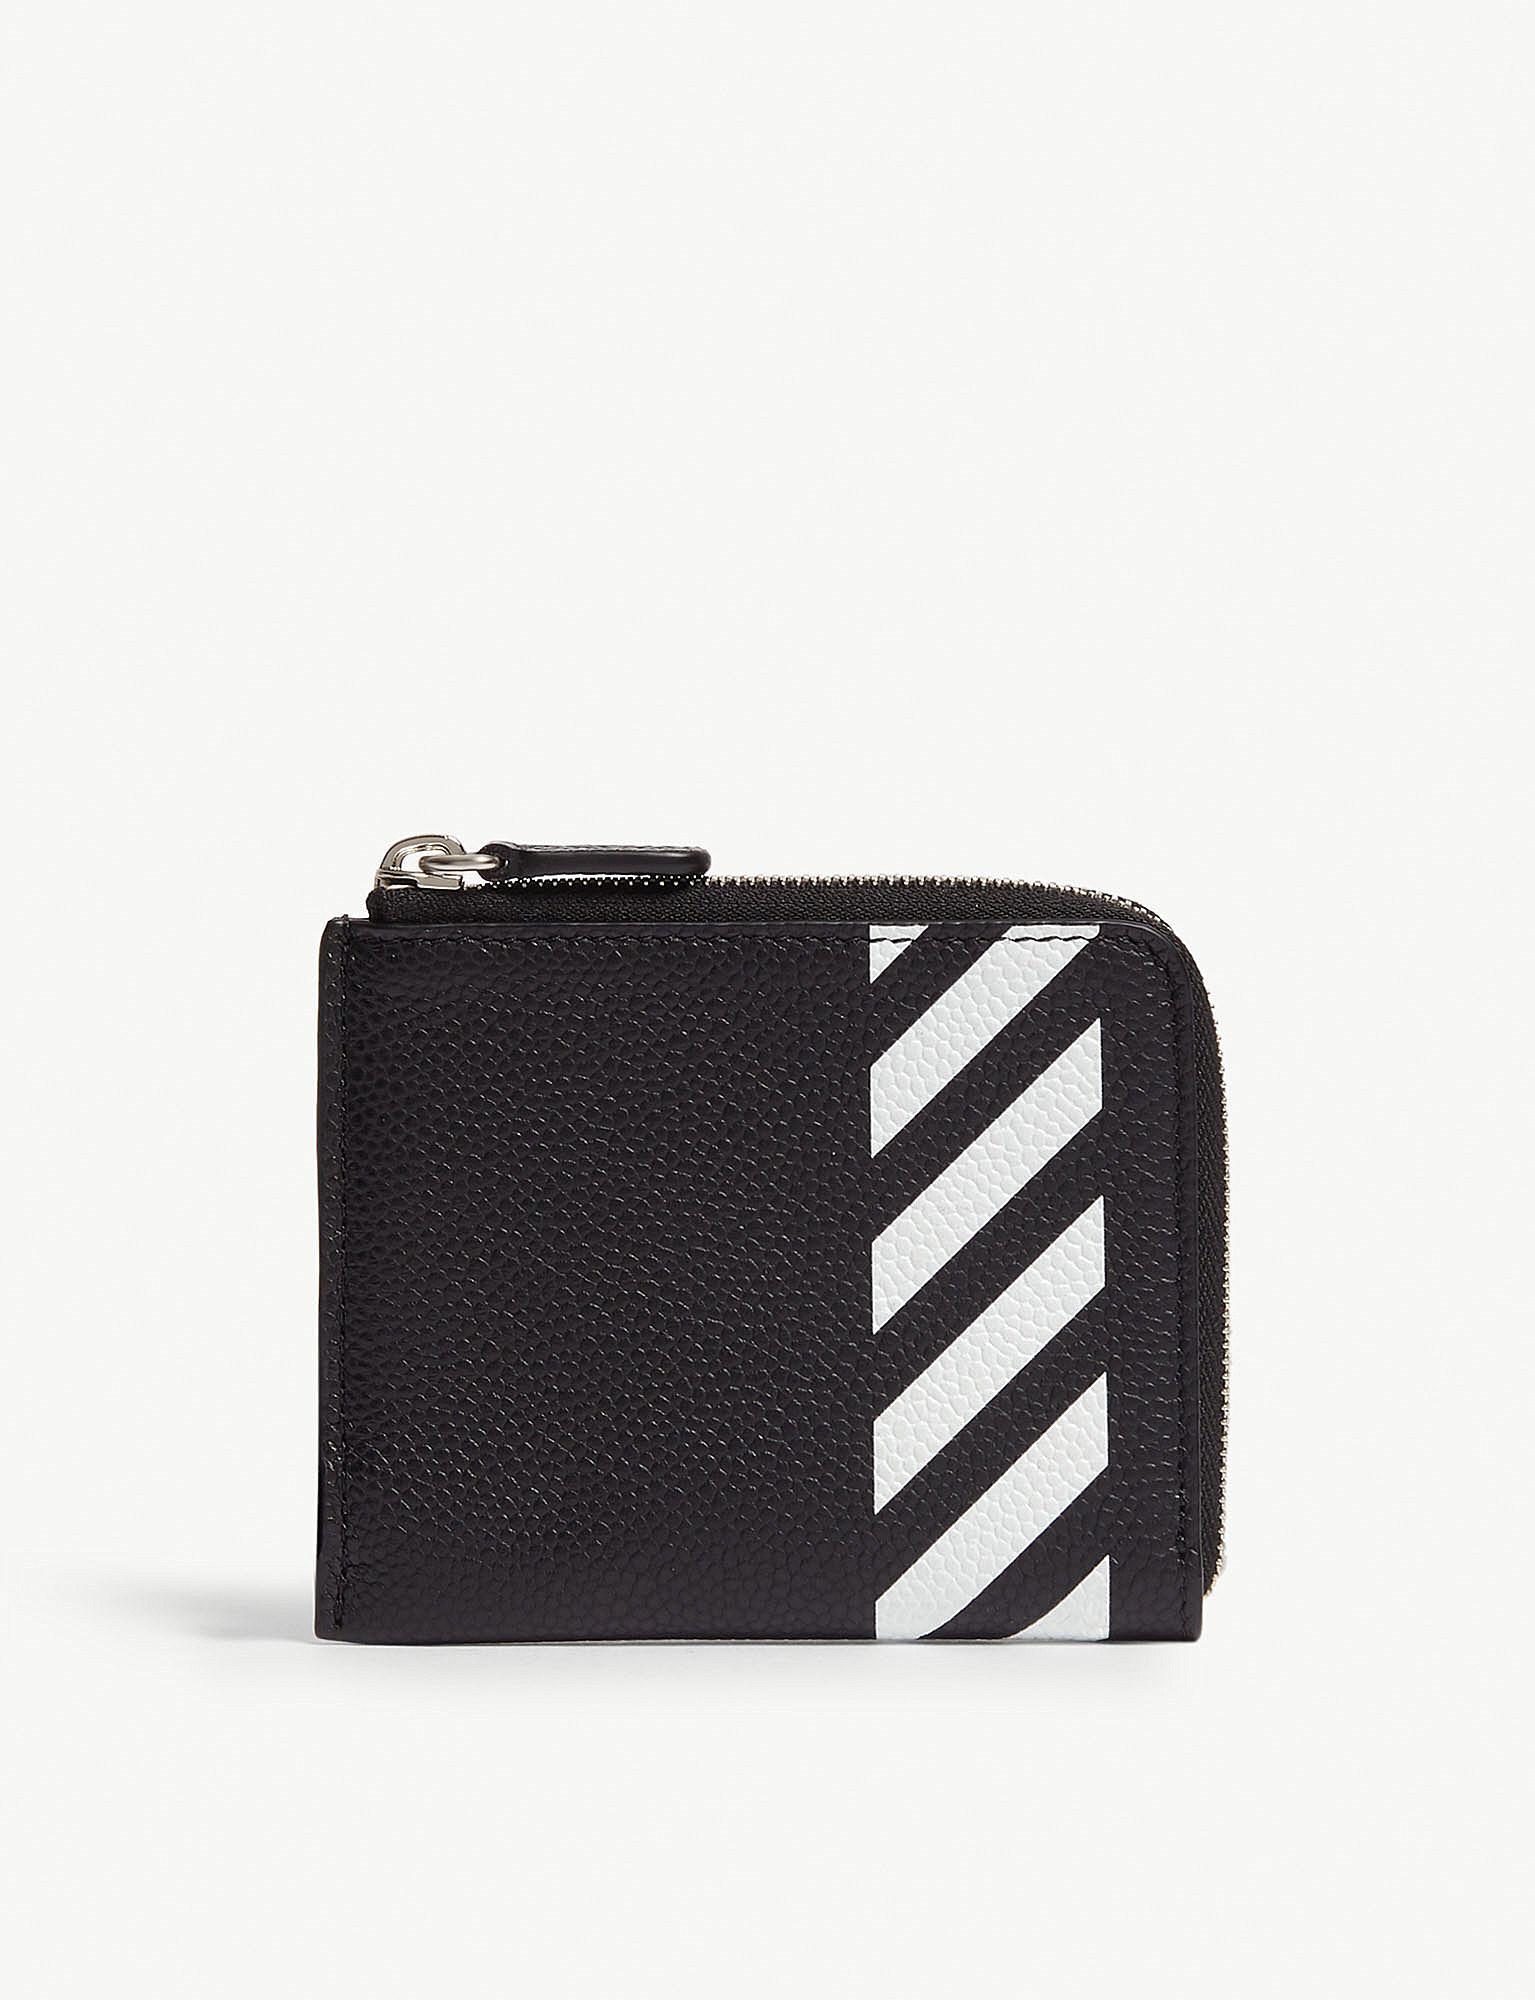 Lyst - Off-White C/O Virgil Abloh Diag Print Wallet W/ Metal Chain in Black for Men - Save 44 ...